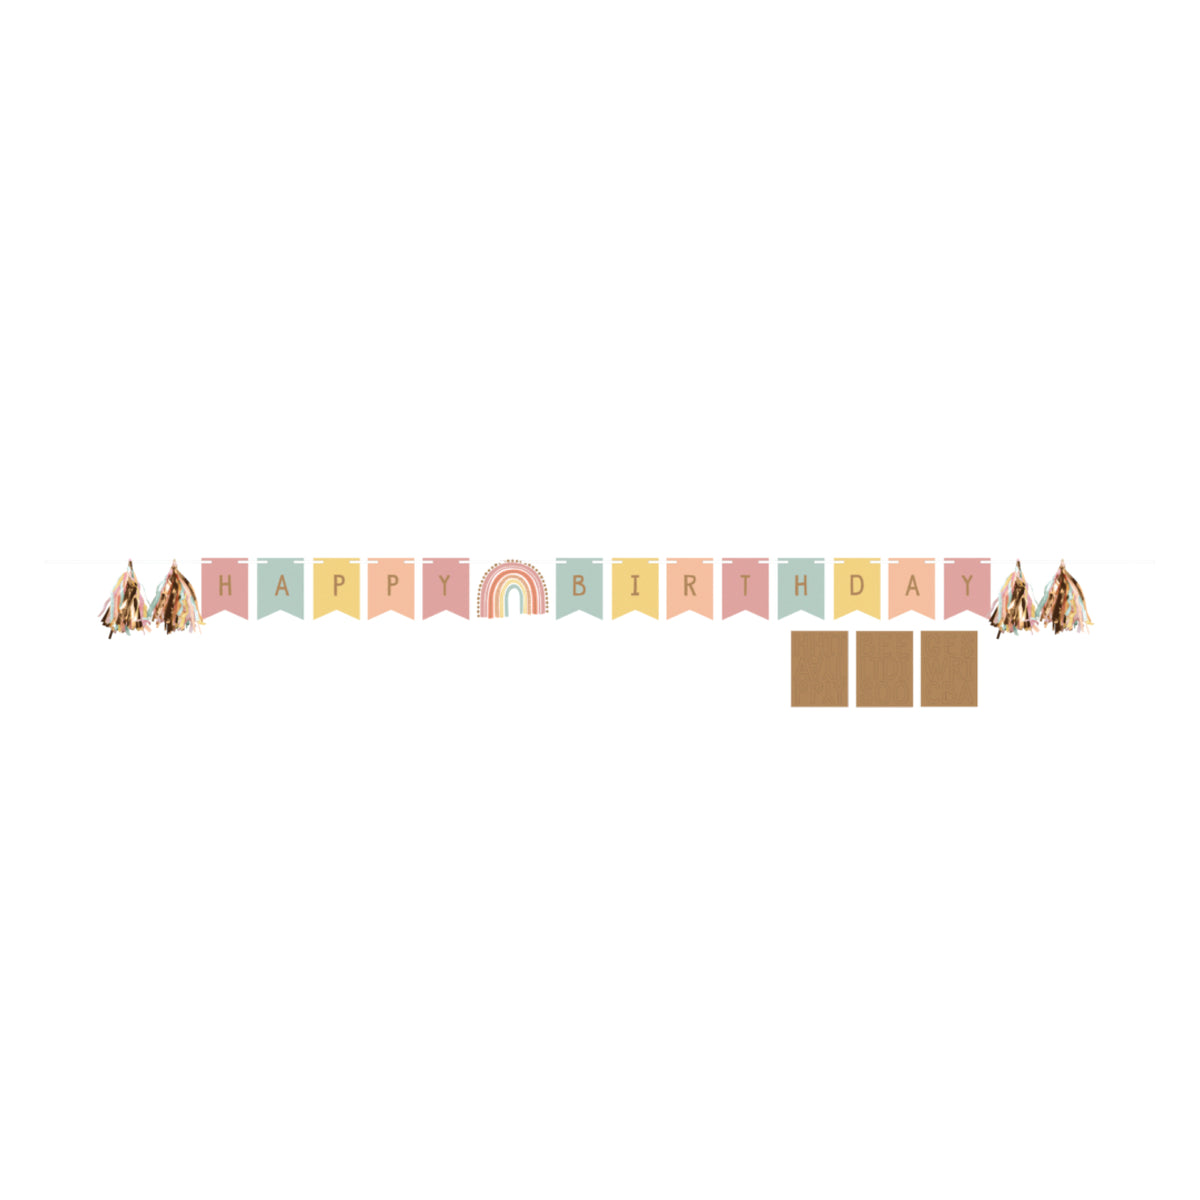 DIY Rainbow Customizable Banner Kit with Letters, Numbers and